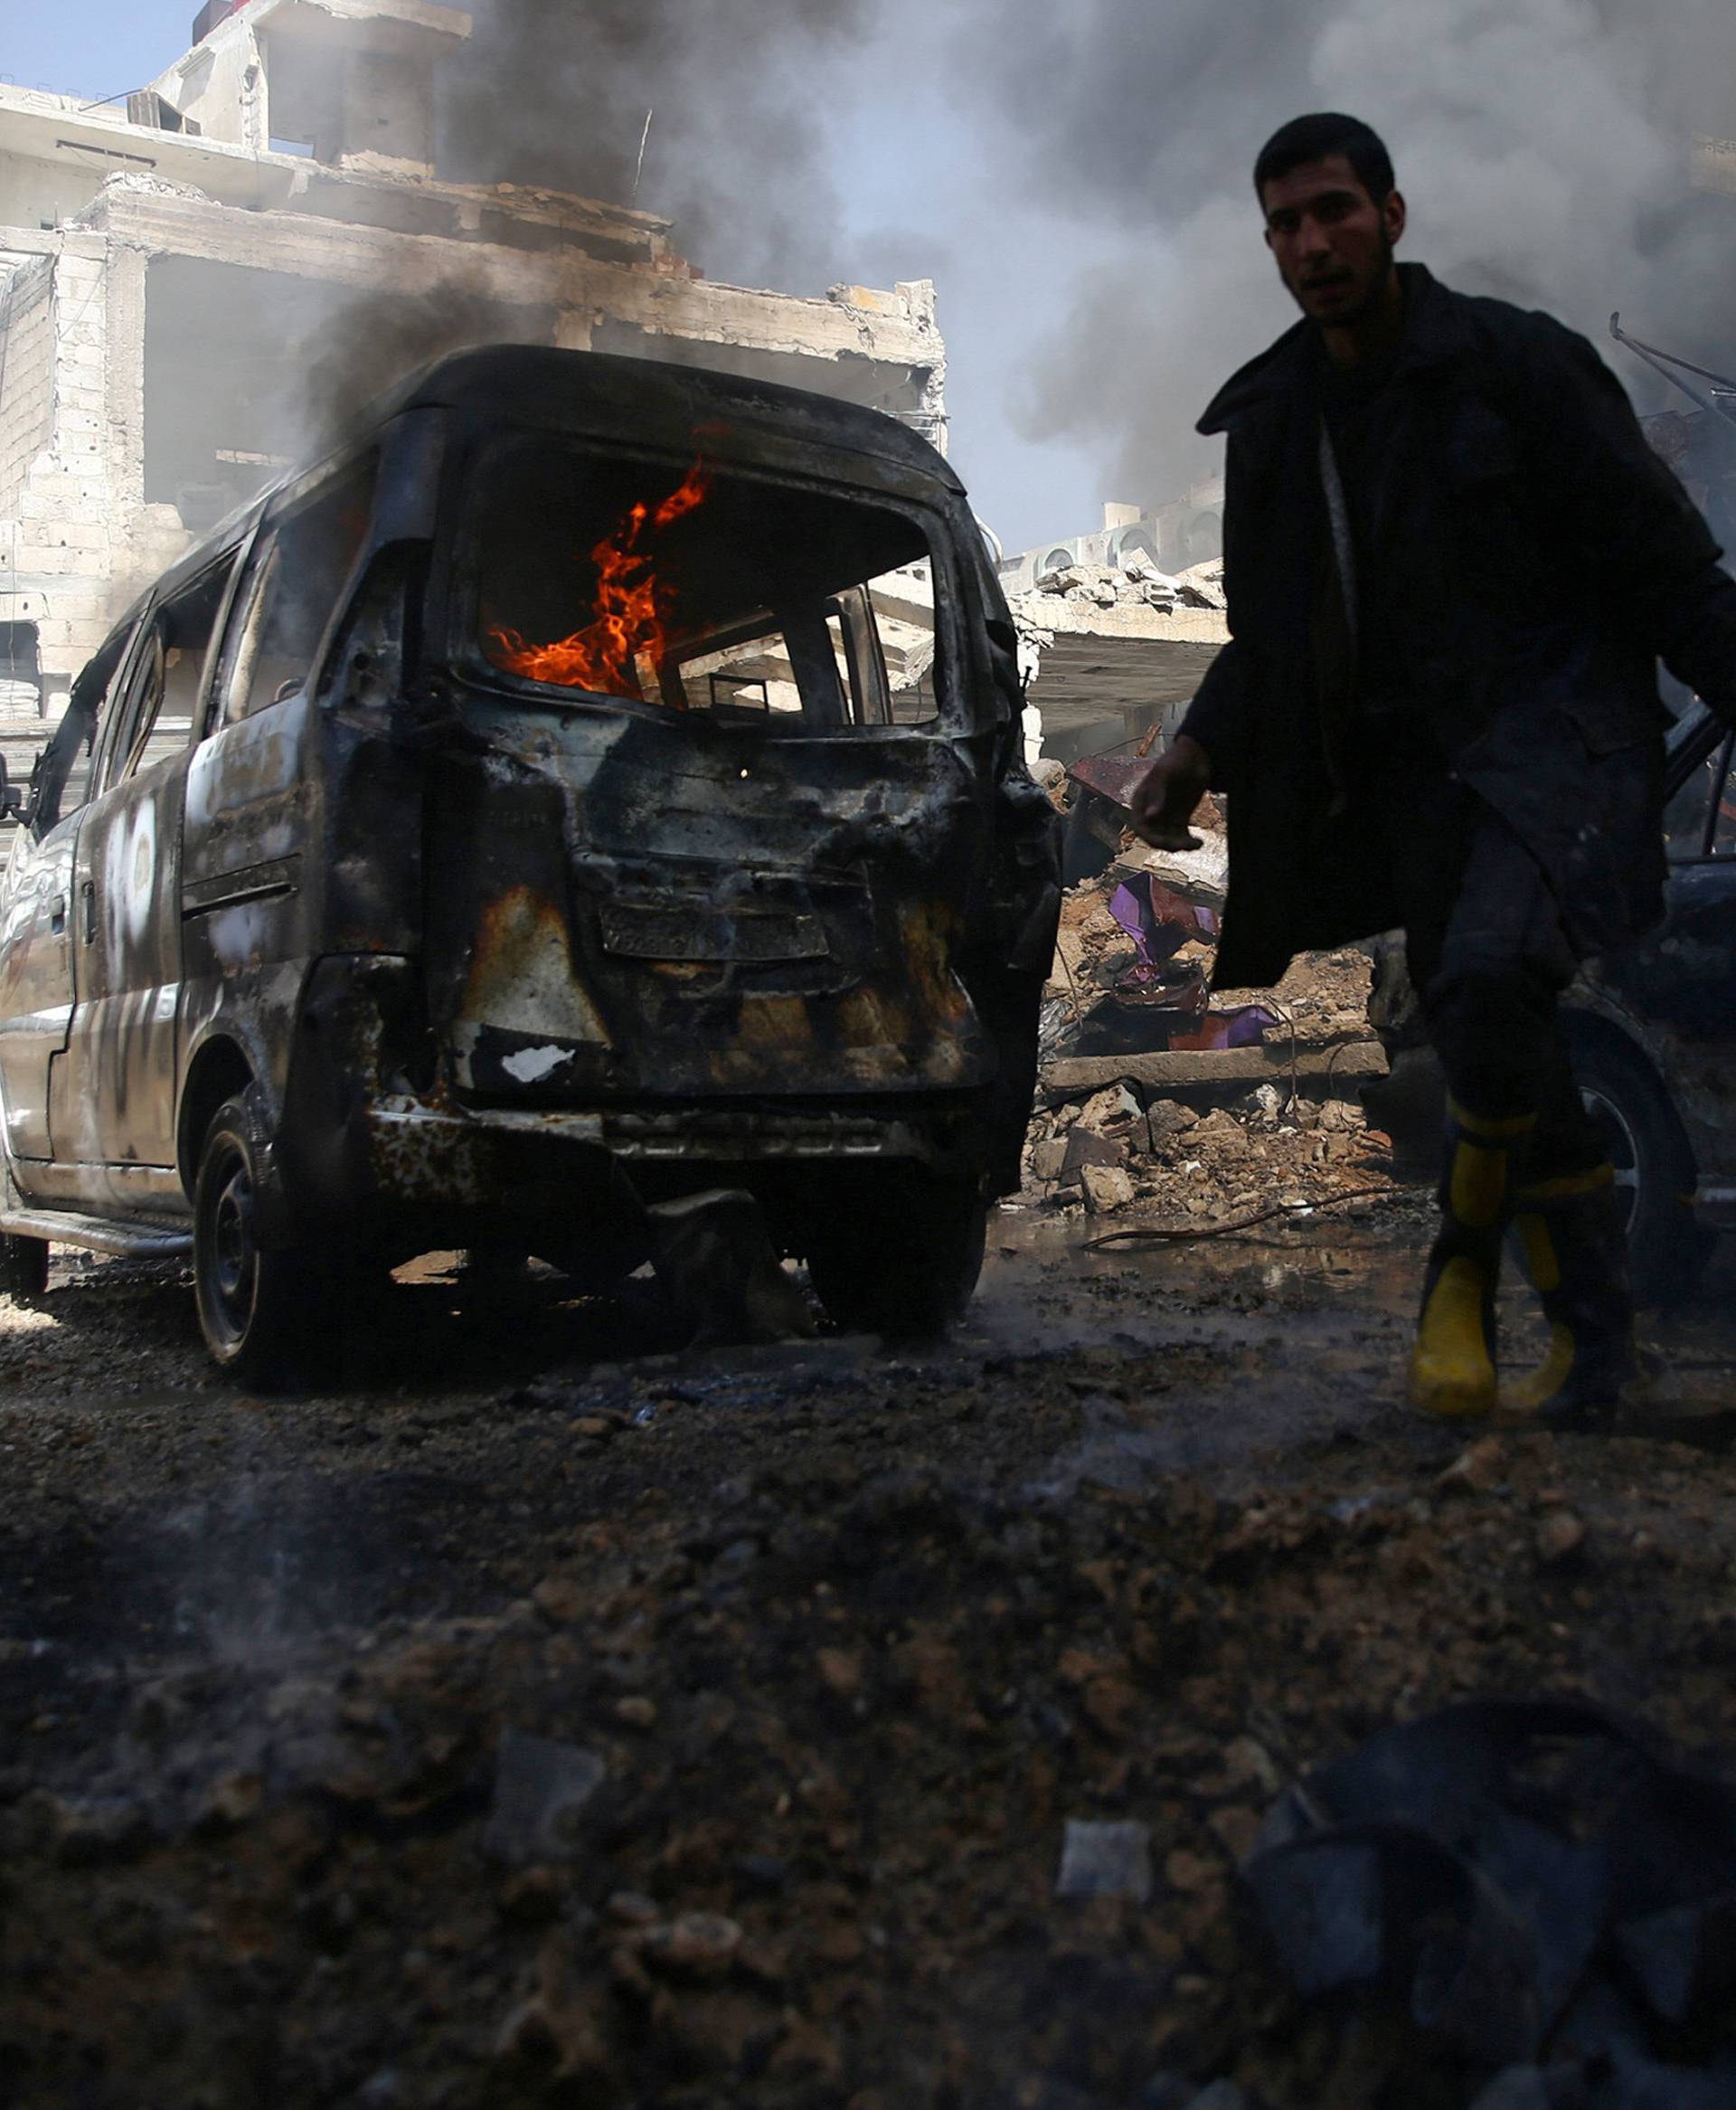 A civil defence member works amid burning vehicles at a site hit by airstrikes in the rebel held besieged Douma neighbourhood of Damascus